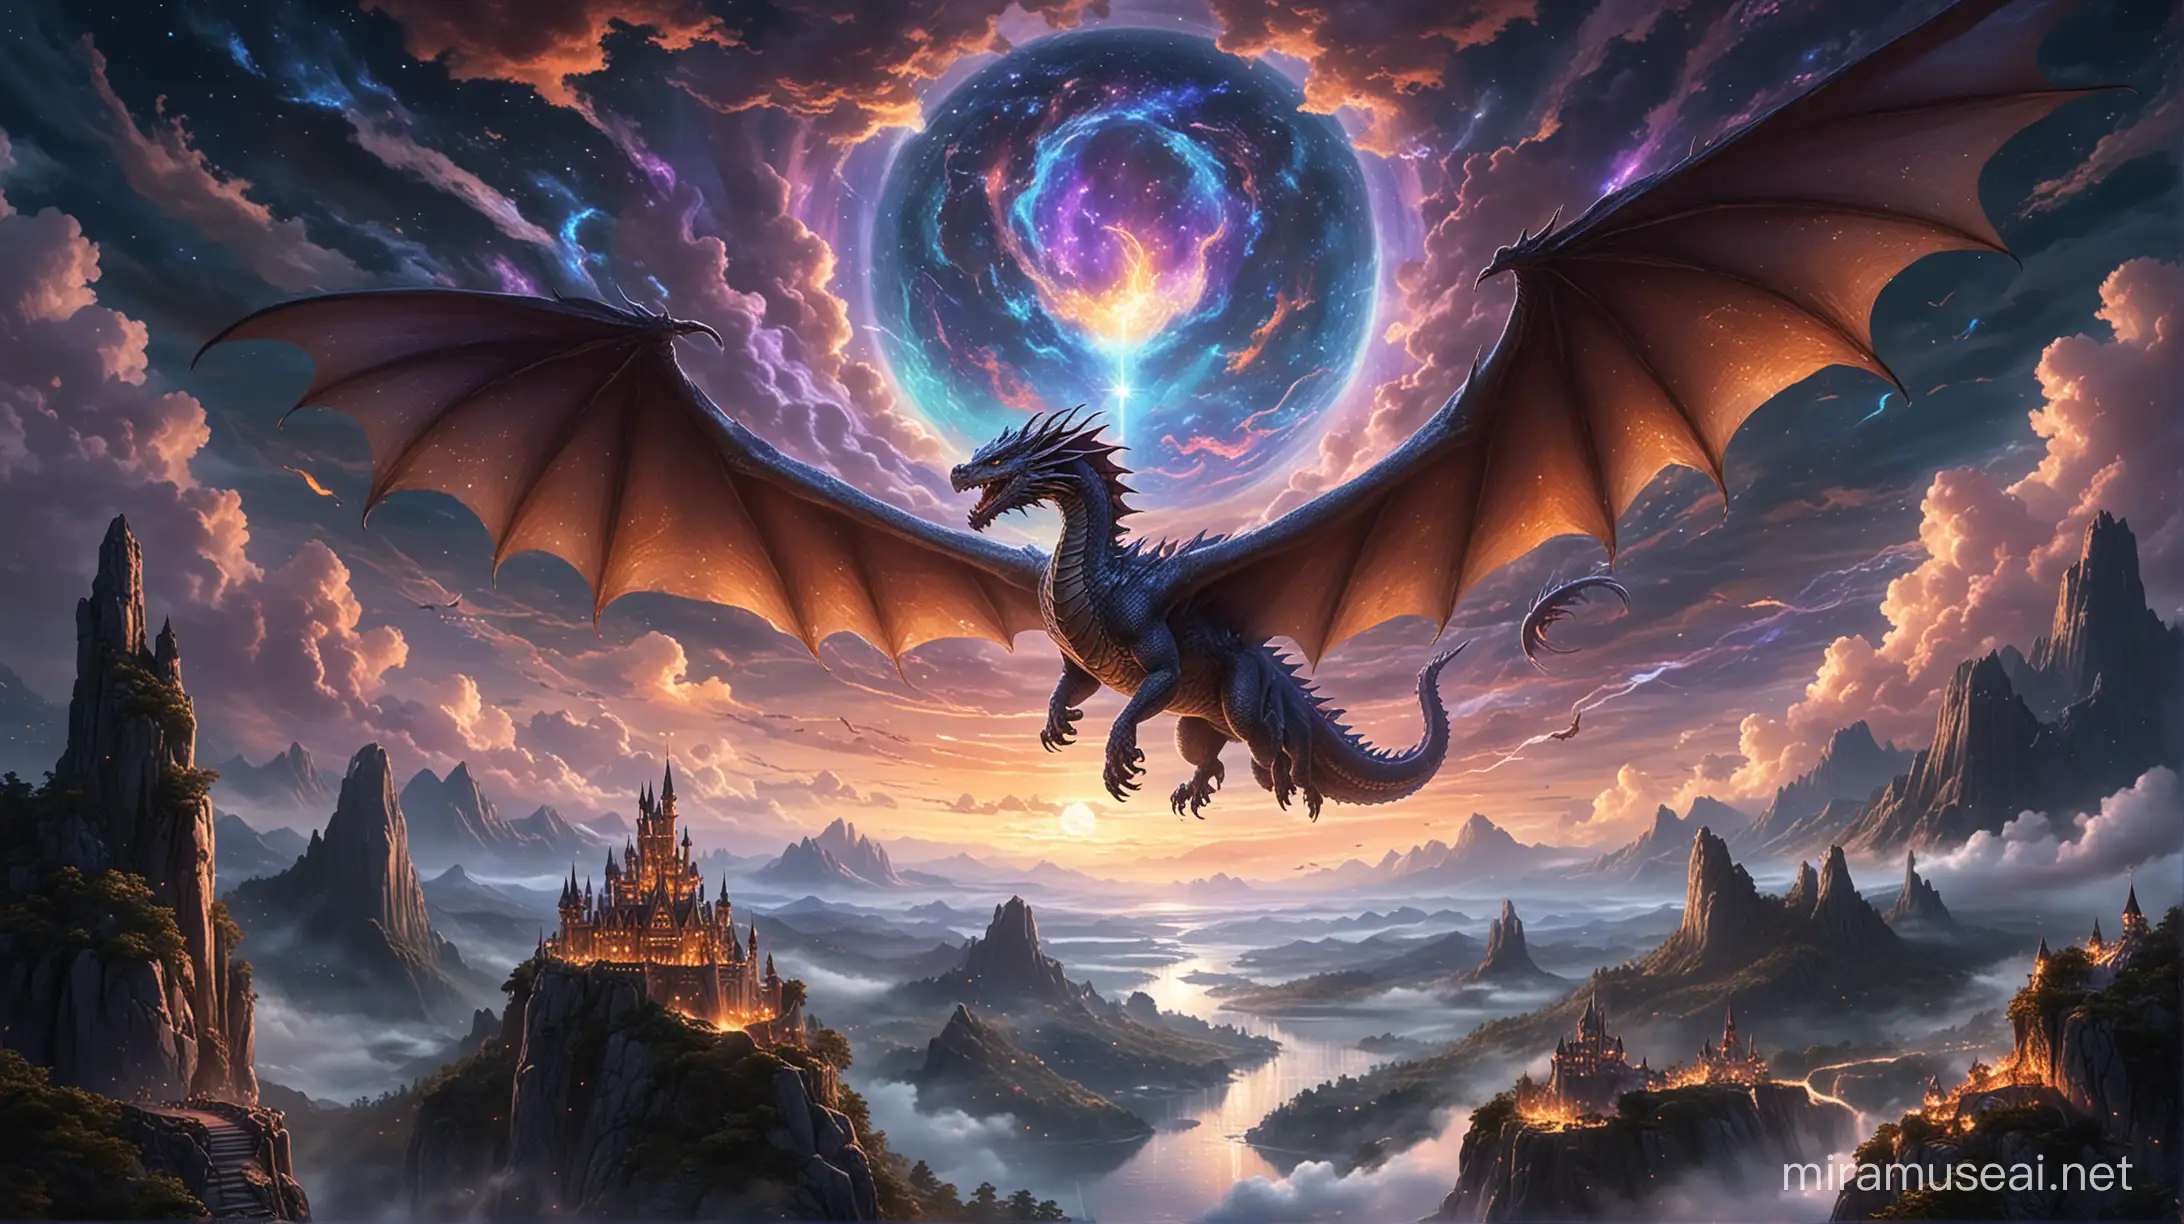 Create an epic scene featuring a majestic dragon soaring through a starlit sky, its scales shimmering with iridescence as it casts a mystical glow over a sprawling fantasy landscape below. Surround the dragon with swirling clouds tinged with hints of magic, and let the moonlight illuminate the scene, adding an aura of enchantment to the breathtaking tableau.